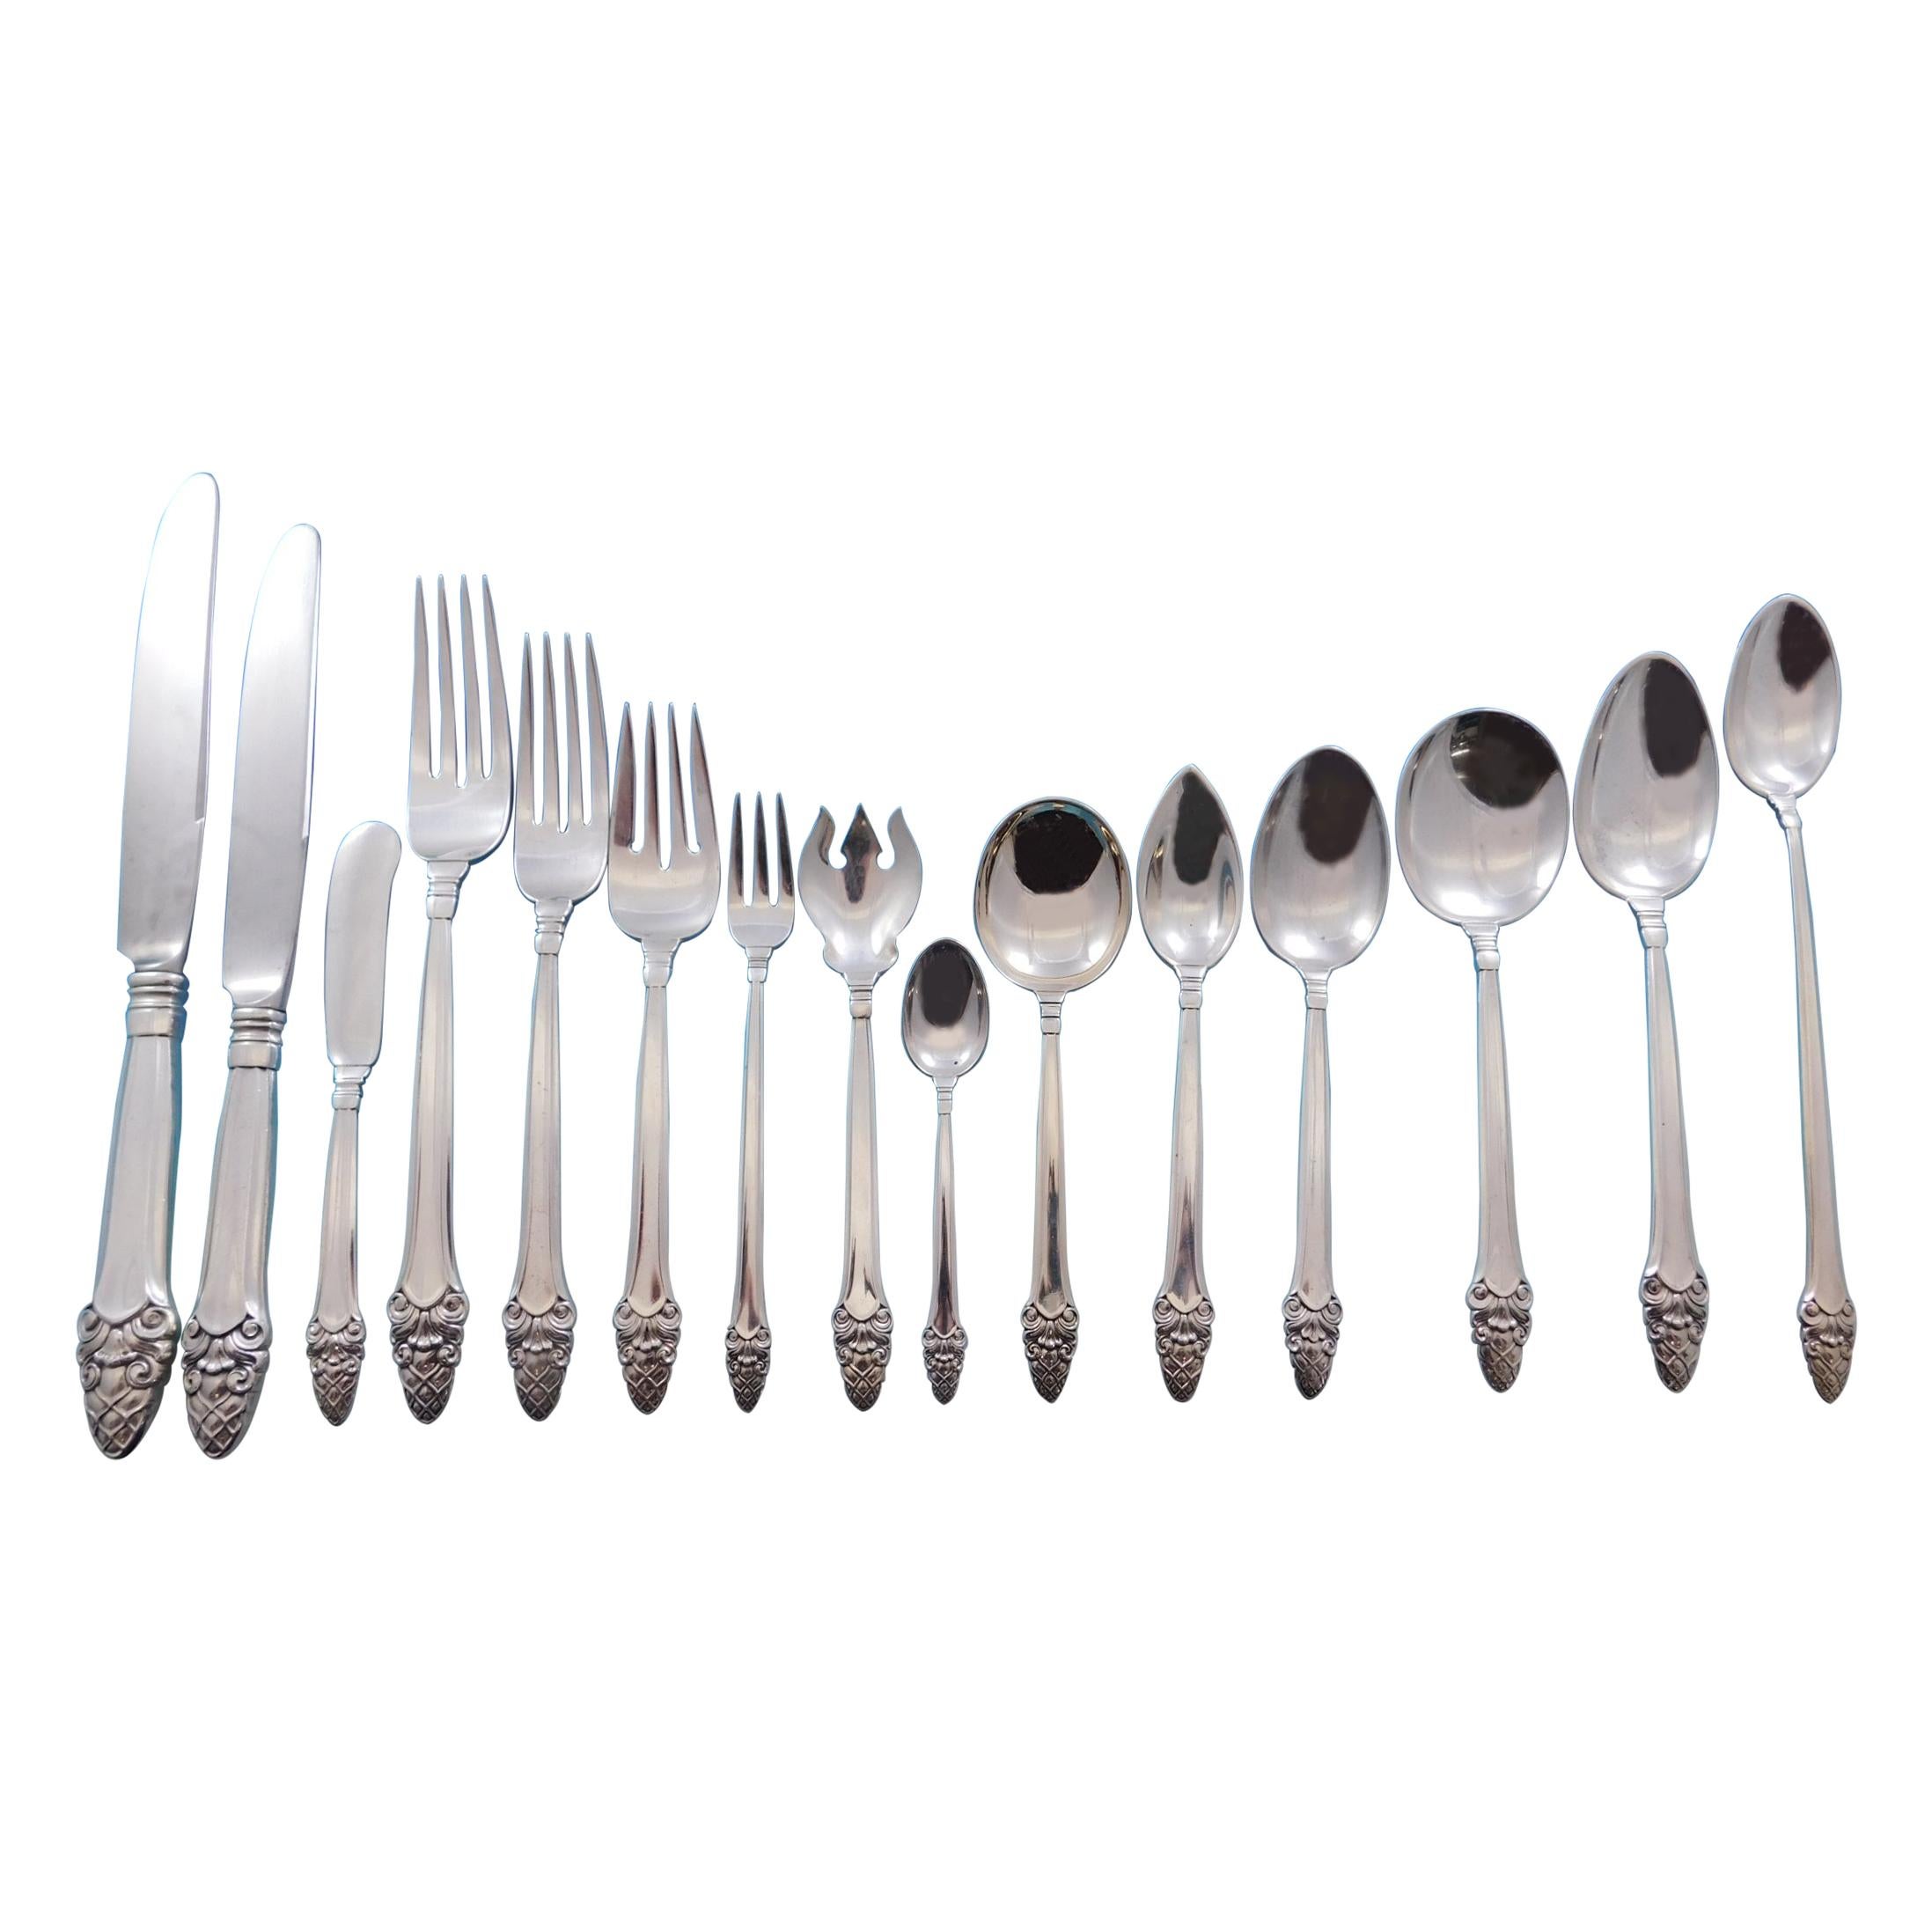 -FRENCH BLADE S MELROSE-GORHAM STERLING 4 PIECE PLACE SETTING 